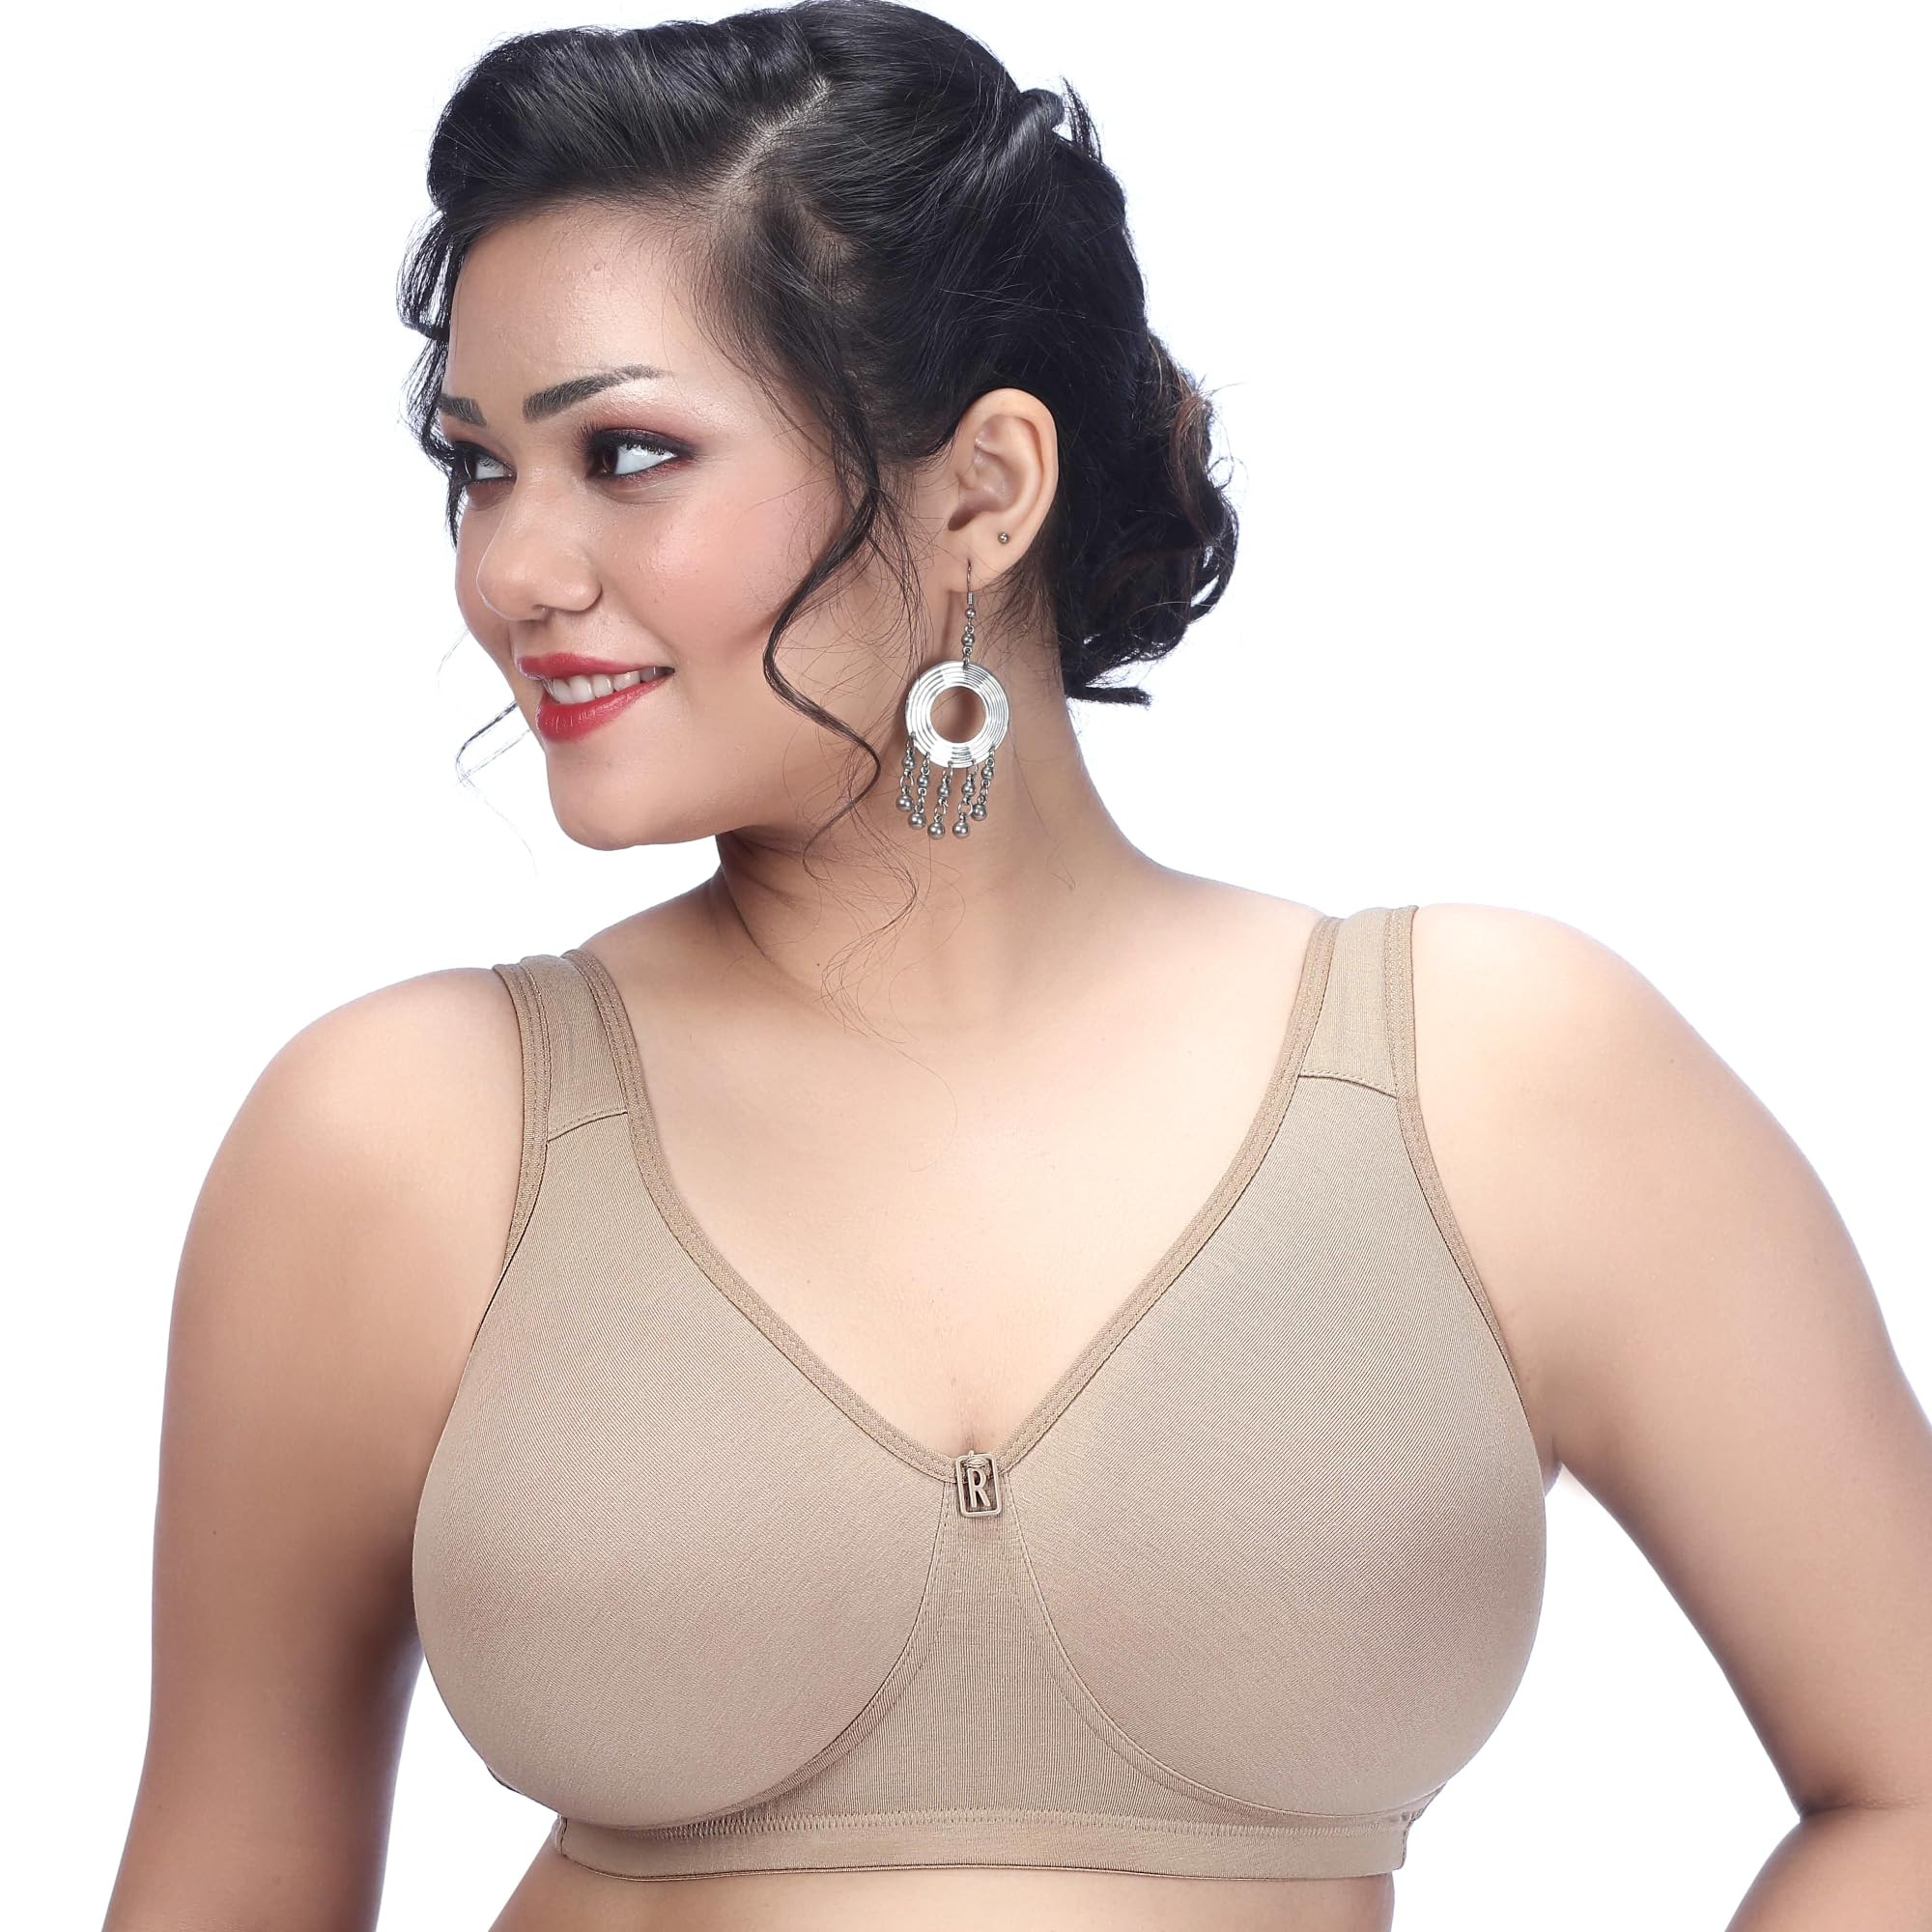 TRYLO COMFORTFIT 36 Nude B - Cup,Size 36B